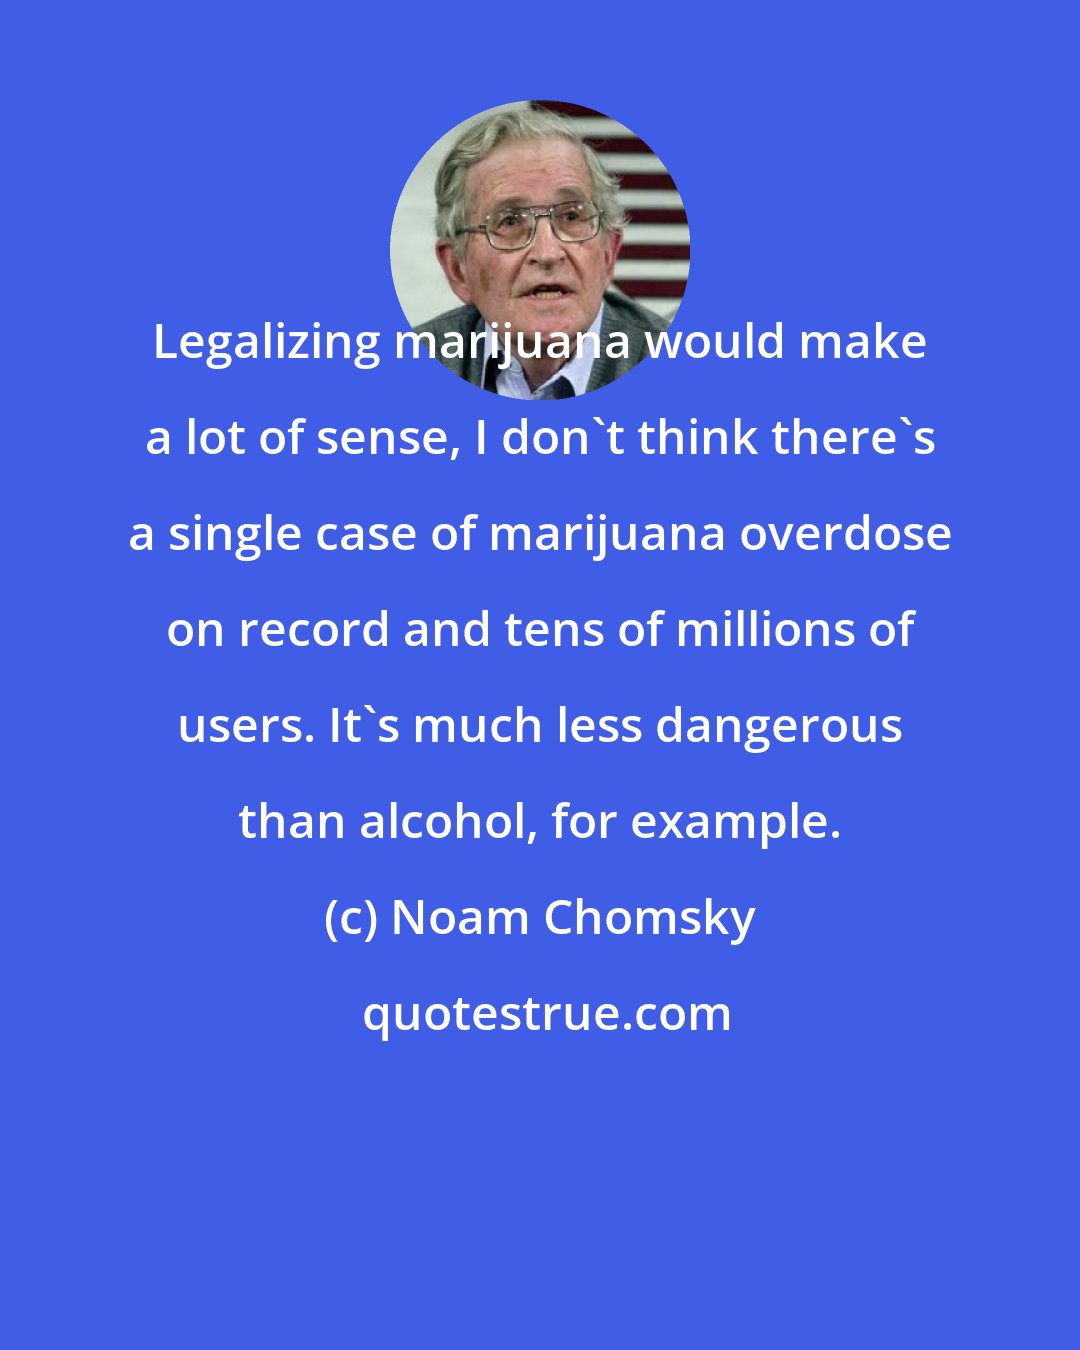 Noam Chomsky: Legalizing marijuana would make a lot of sense, I don't think there's a single case of marijuana overdose on record and tens of millions of users. It's much less dangerous than alcohol, for example.